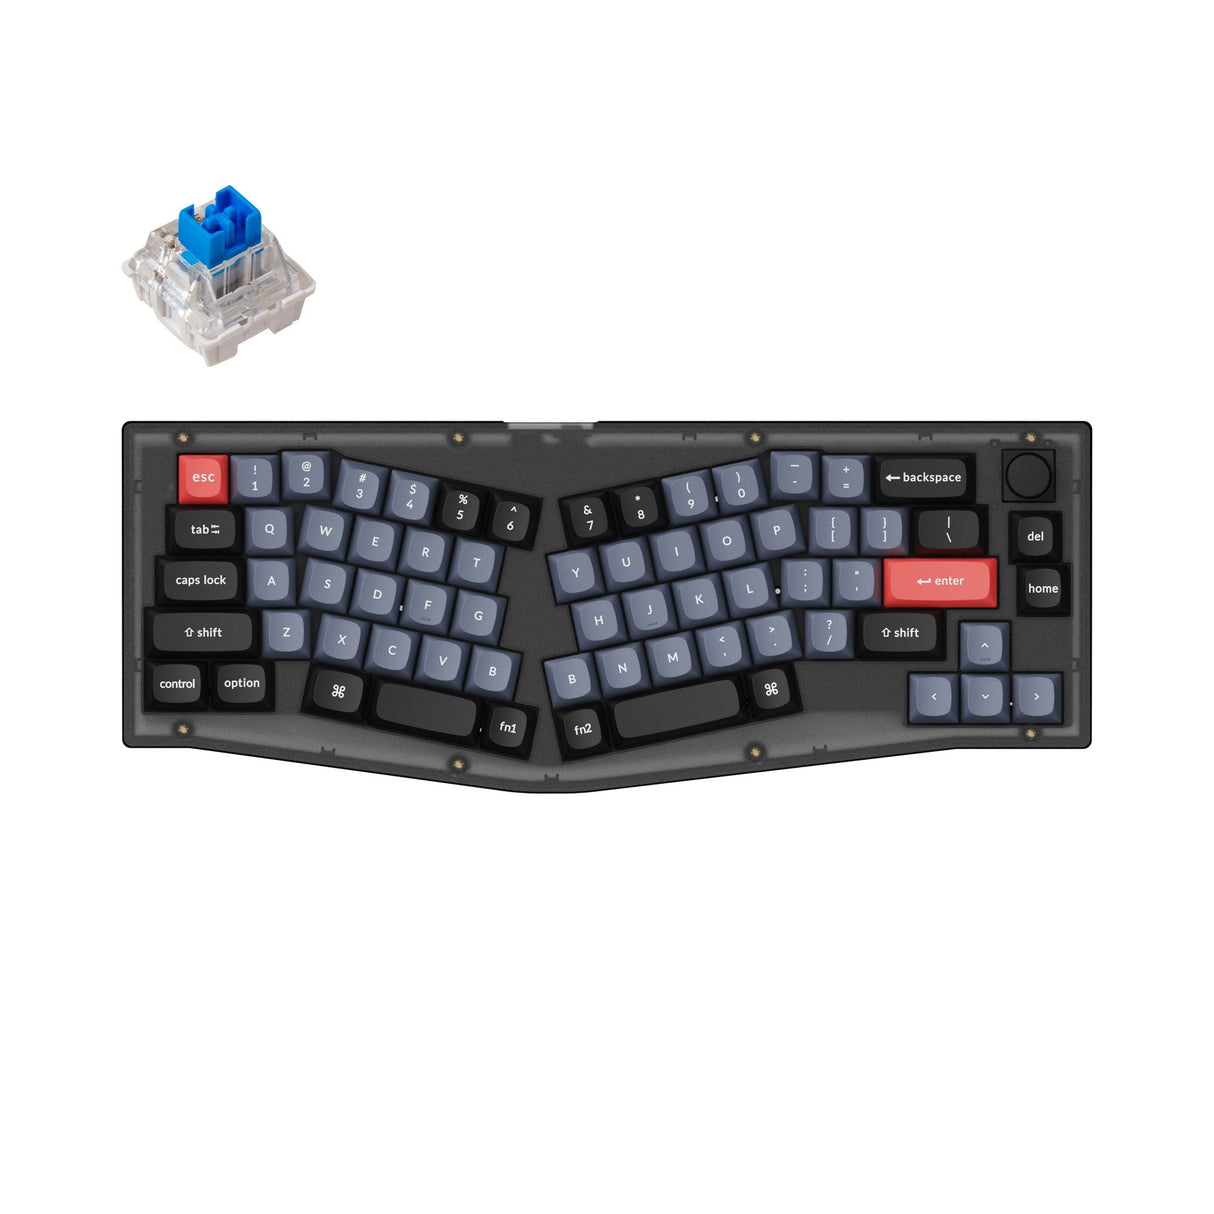 Keychron V8 Custom Mechanical Keyboard knob version frosted black QMK/VIA alice 65% layout hot-swappable switch blue